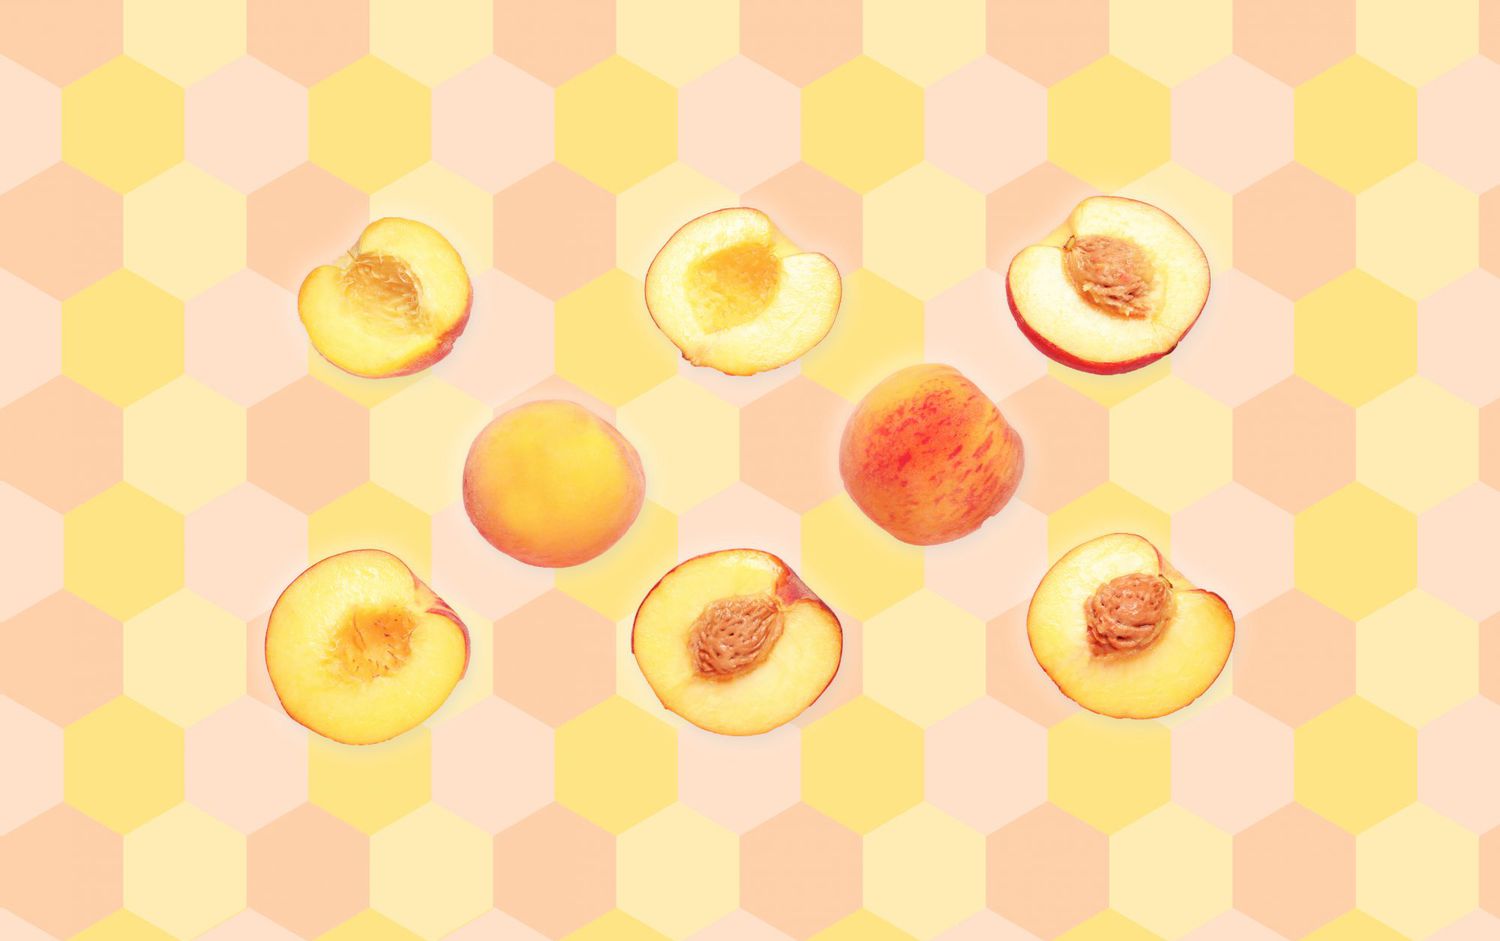 whole peaches and halved peaches on patterned background